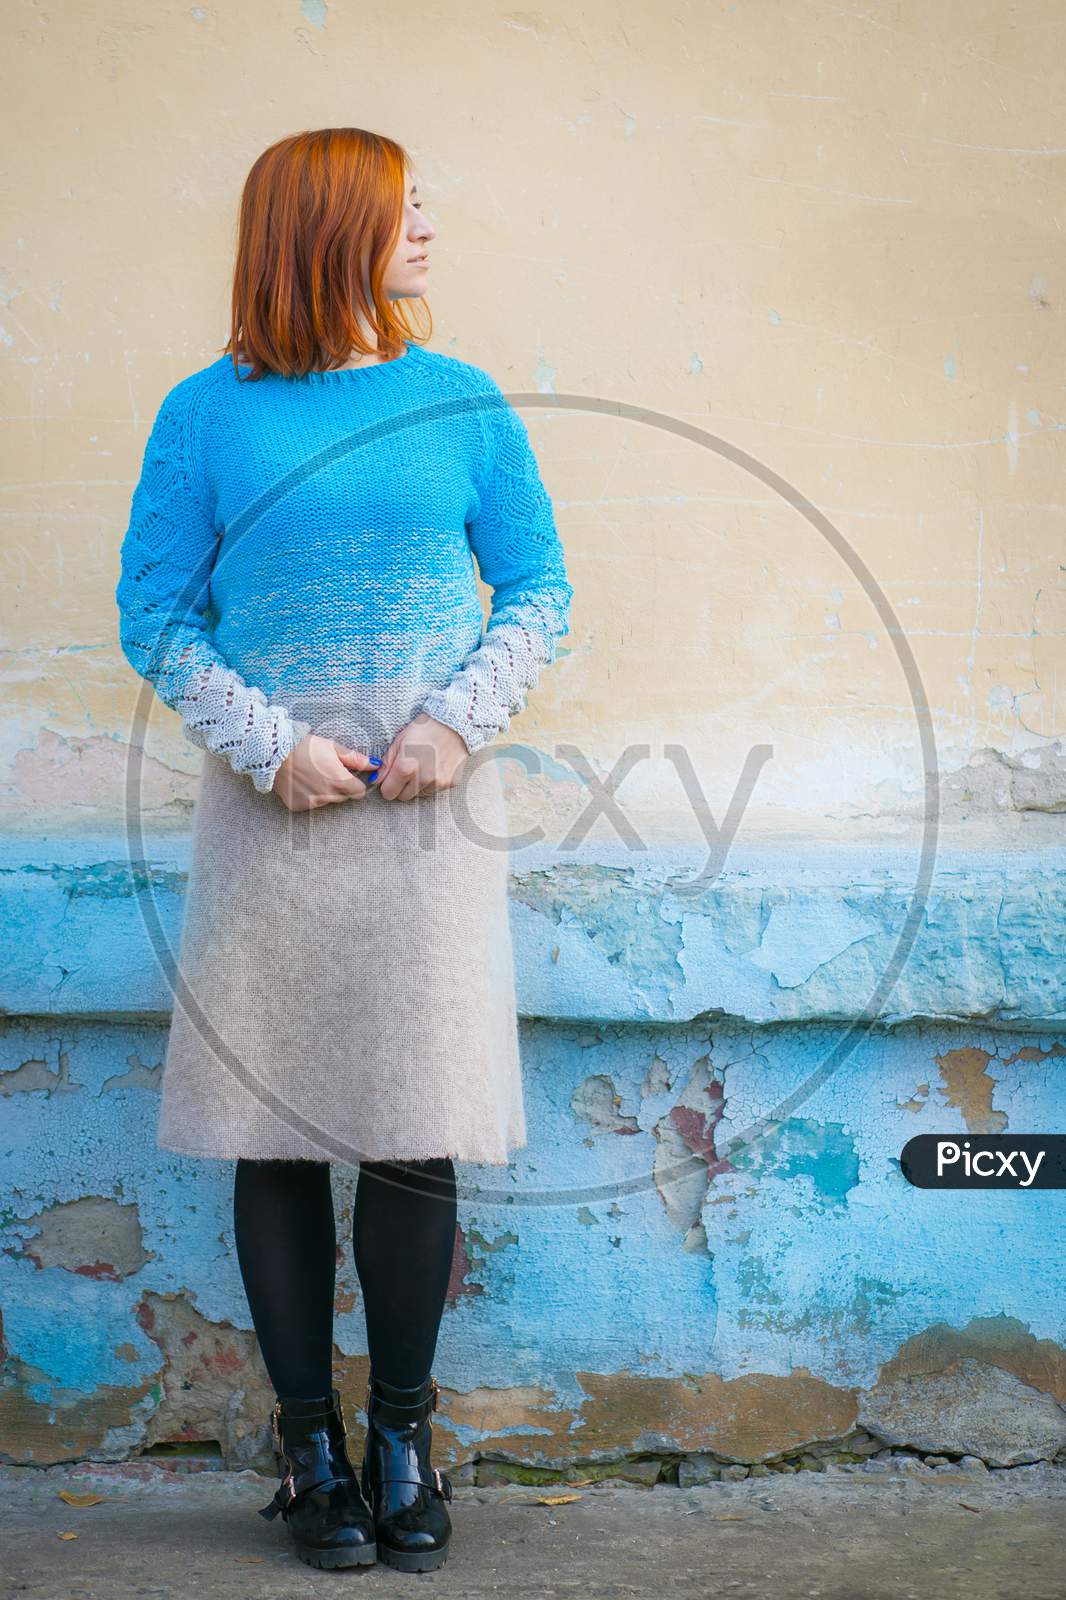 A Beautiful Young Woman With Red Hair In A Blue Sweater Made Of Natural Wool And Woolen Beige Skirt Smiling And  Posing On A City Street